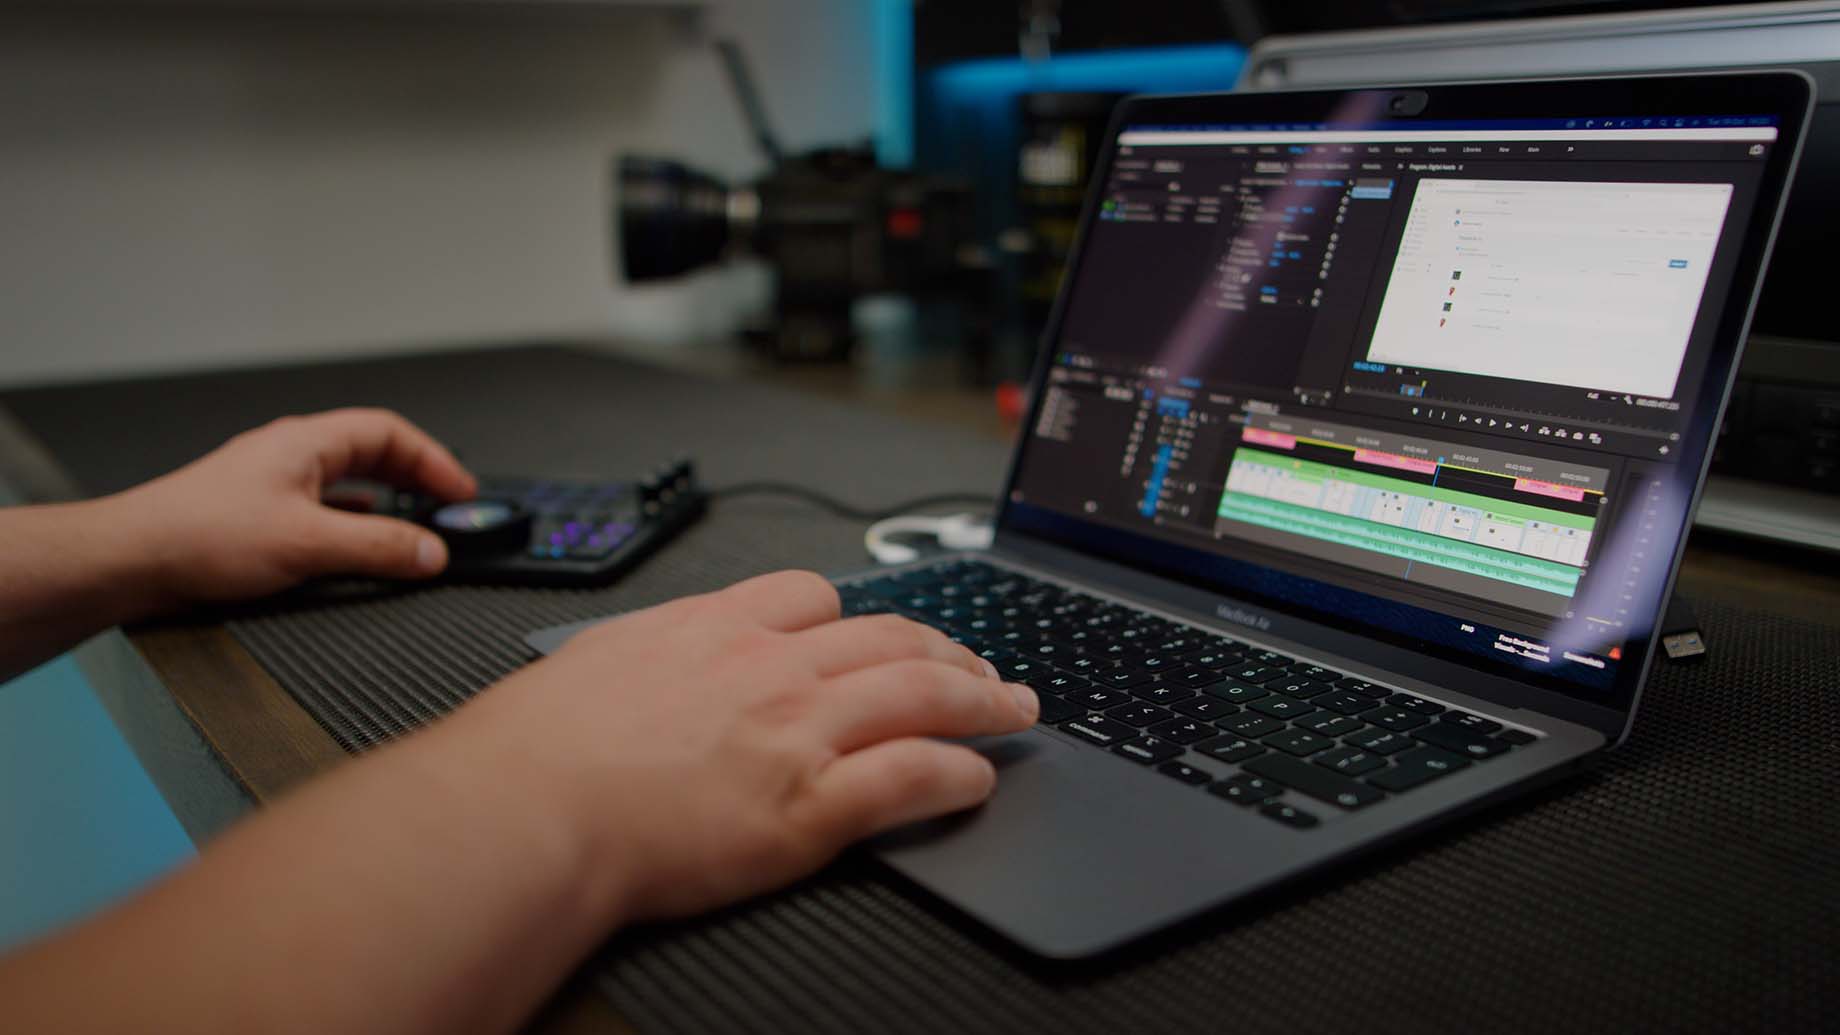 premiere pro on macbook air on desk with hand